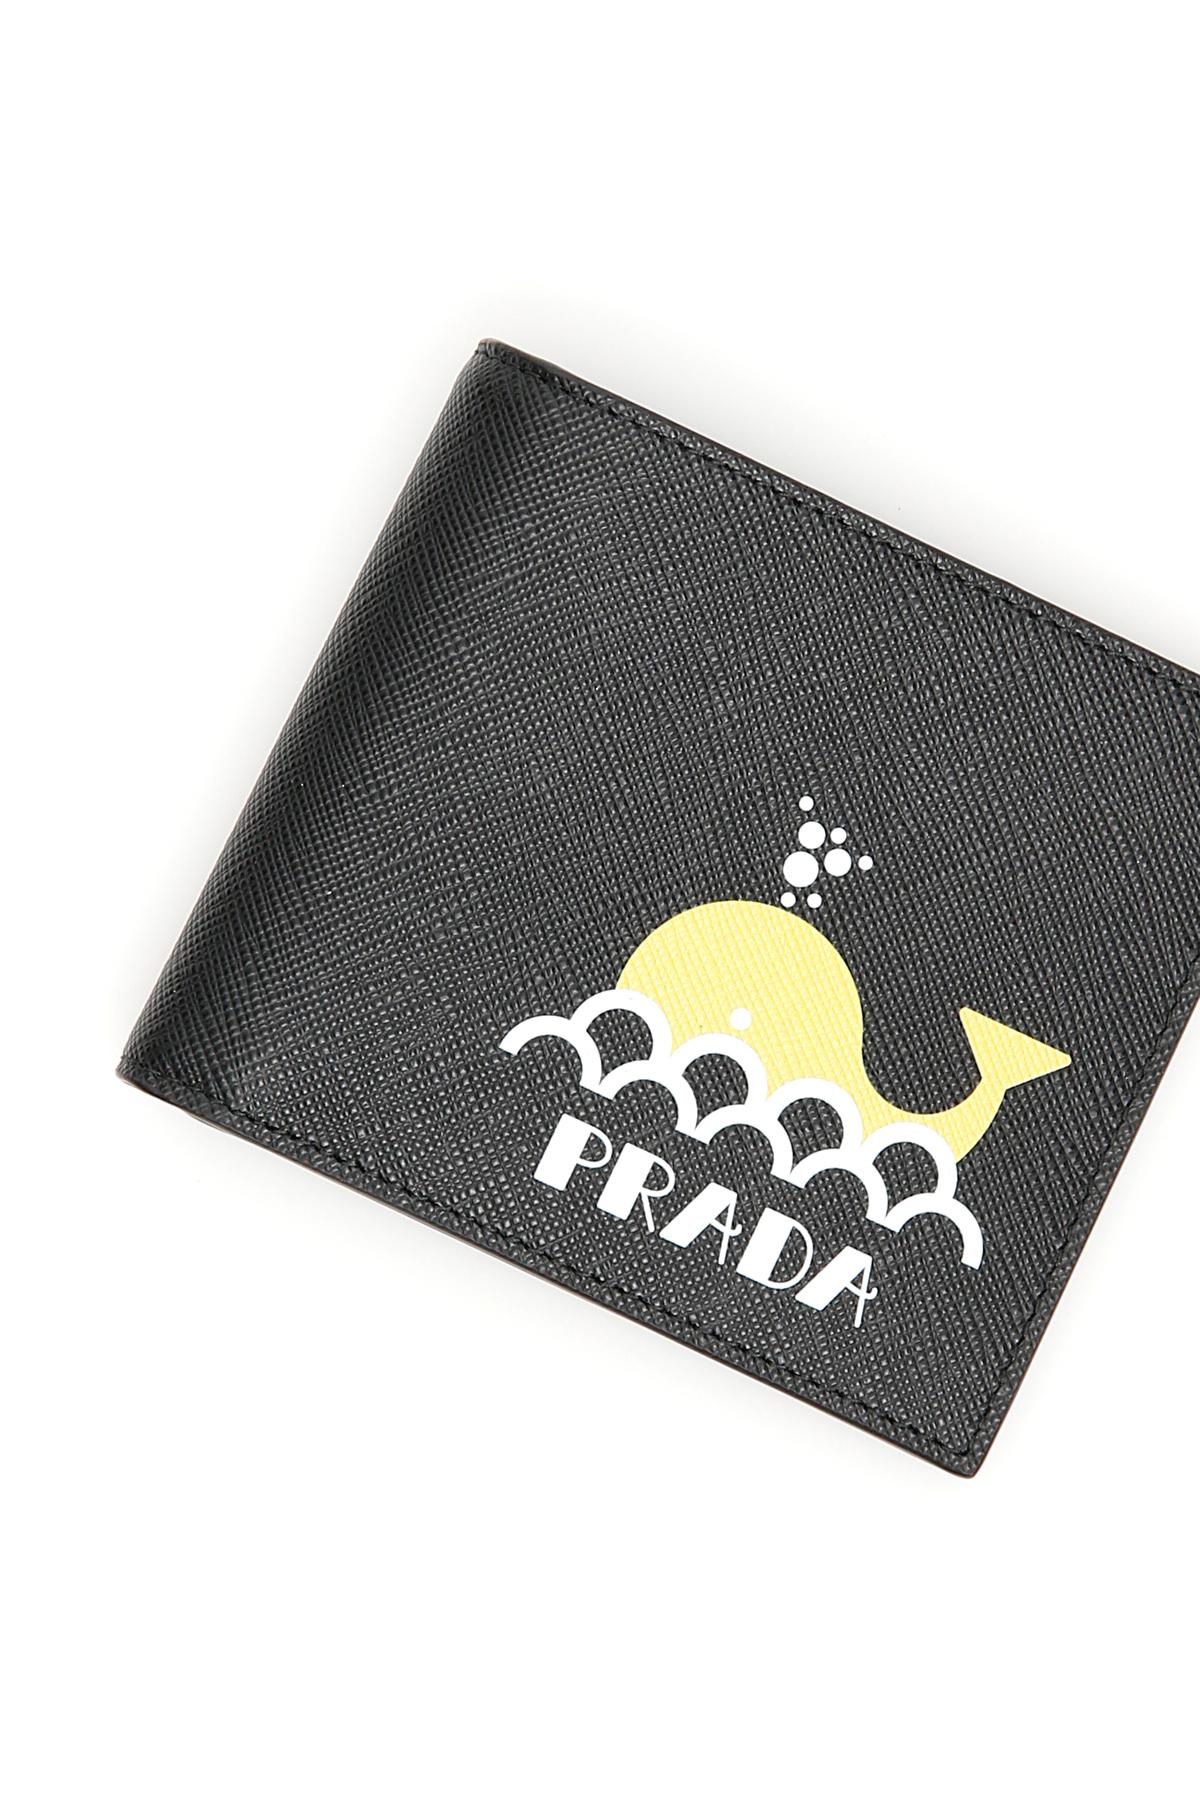 Prada Leather Whale Print Wallet in 